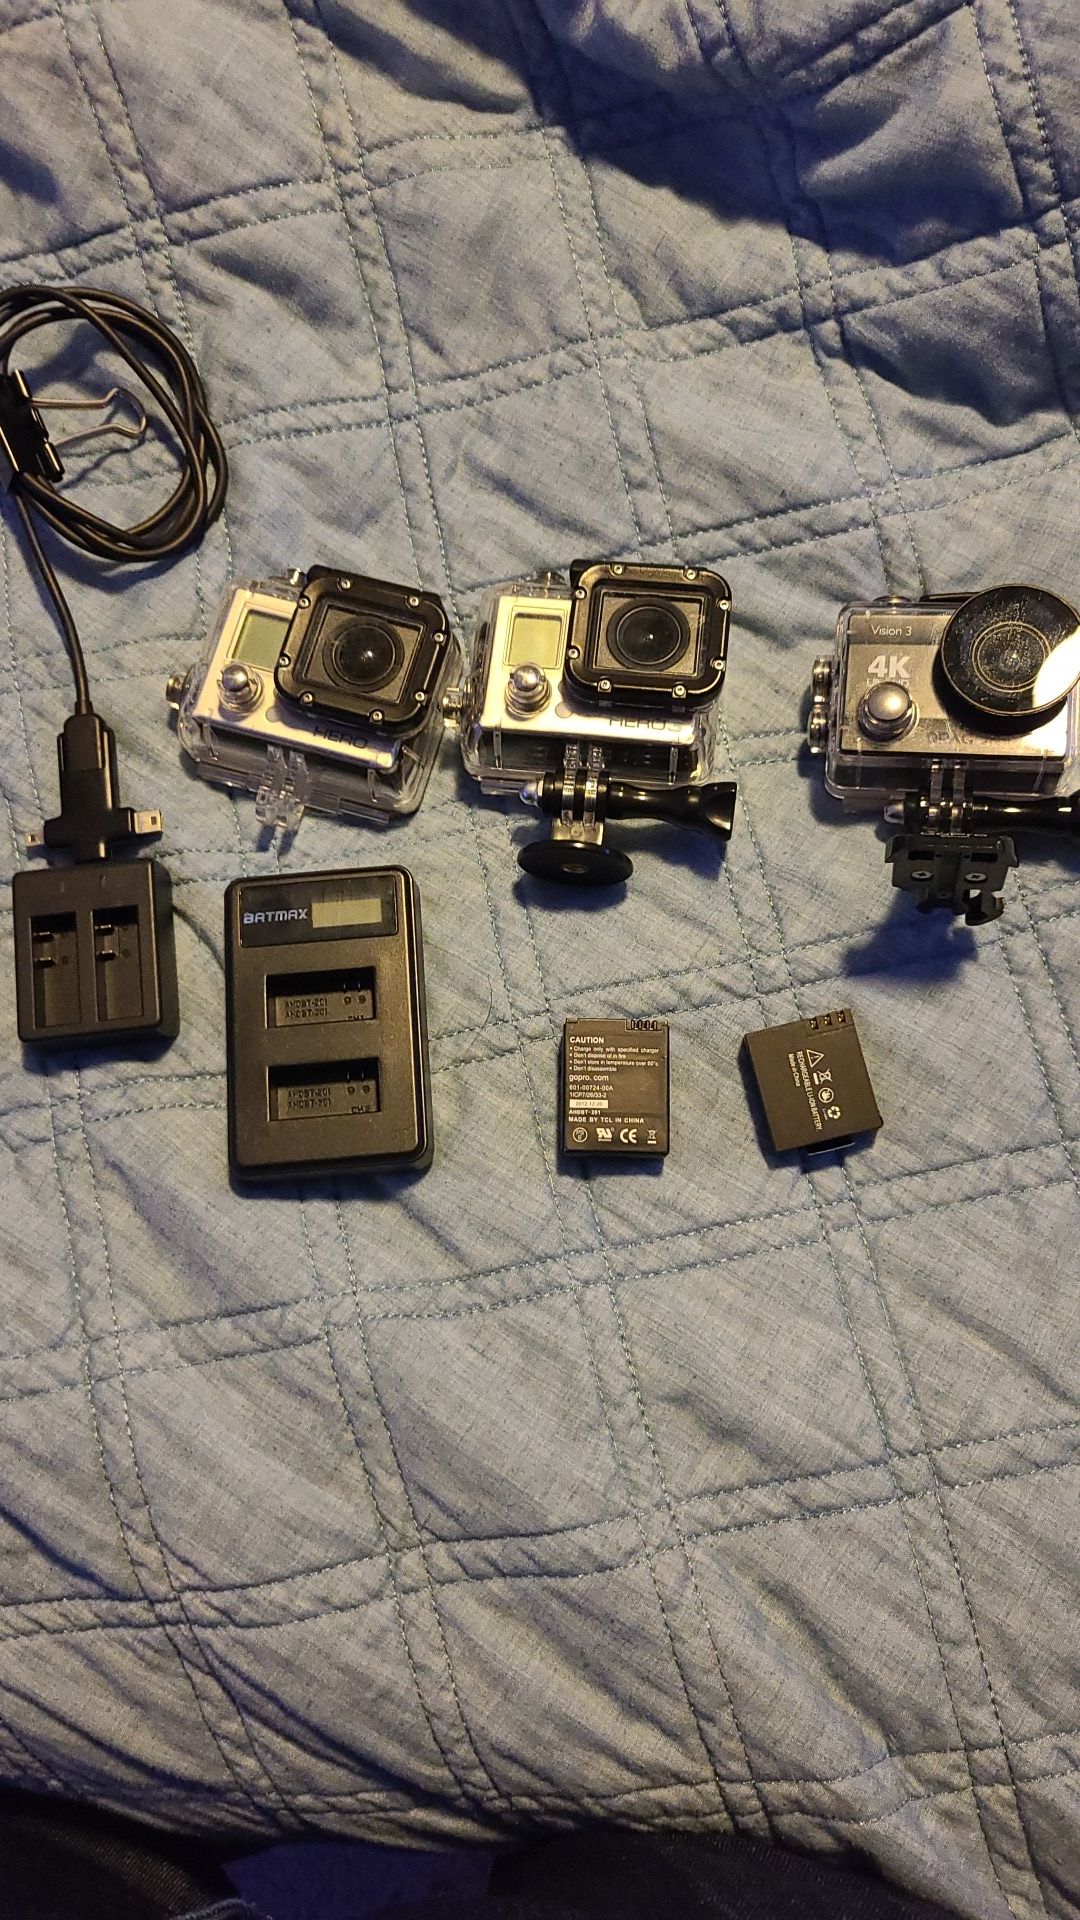 Go Pro Hero 3 and Vision 3 4K action cams